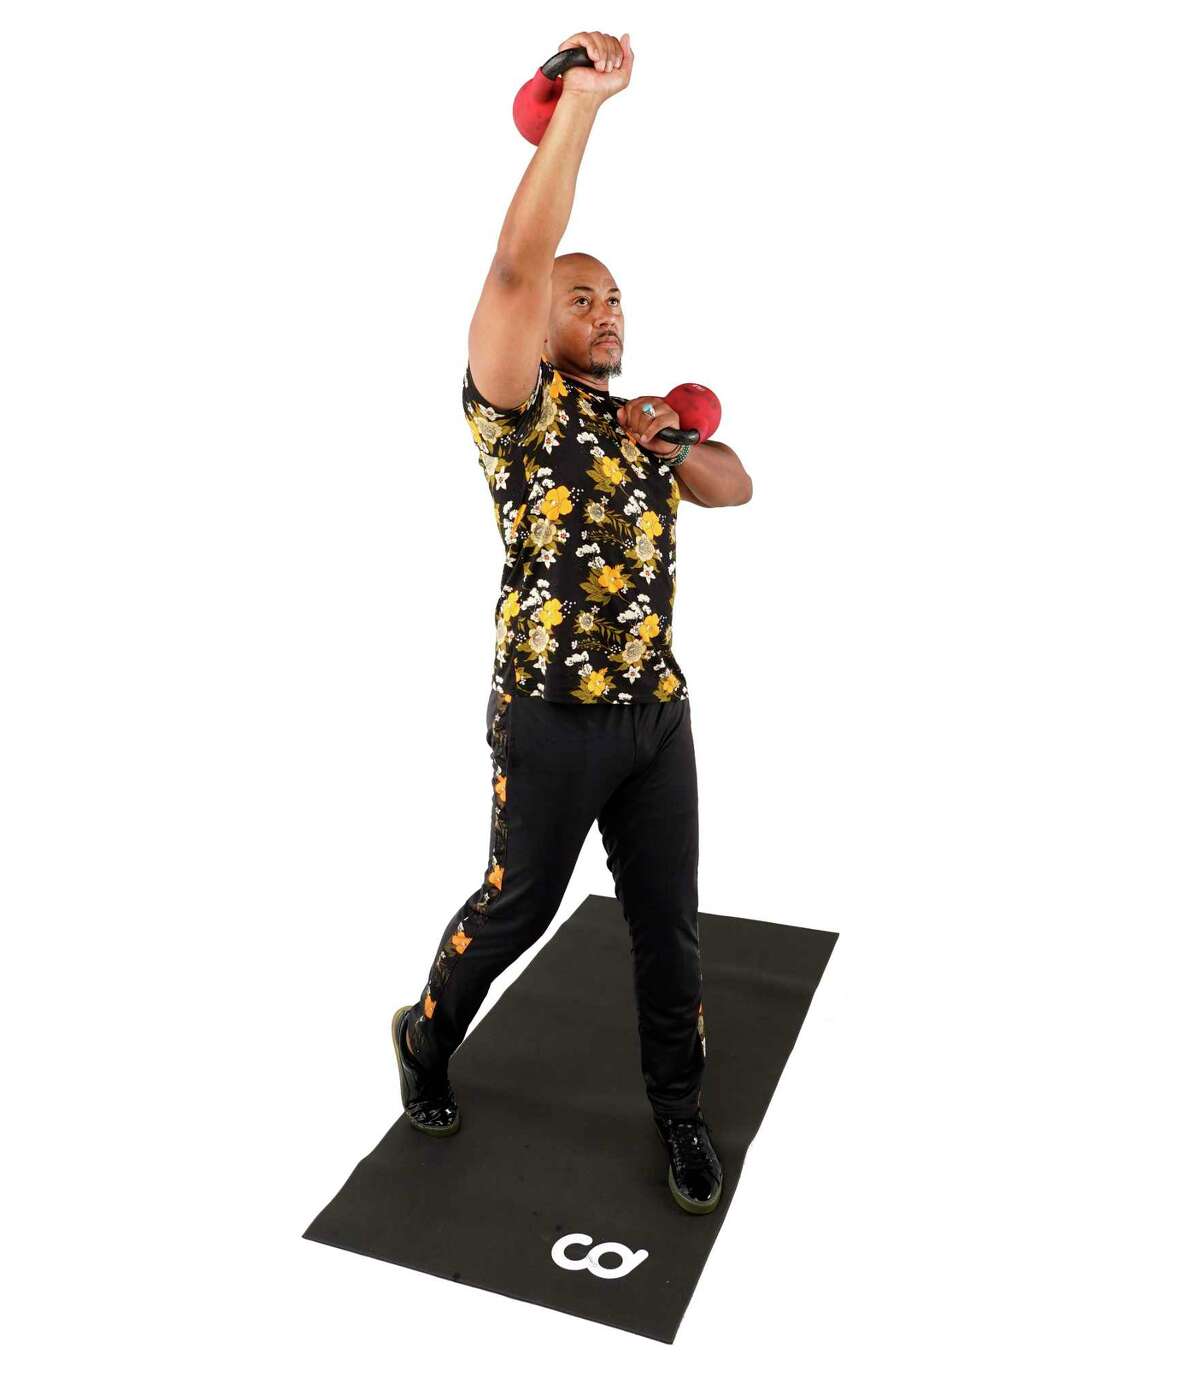 Rotate your torso 90 degrees while pressing the kettlebell overhead. Pivot the ball of your trail foot and return to rack position.